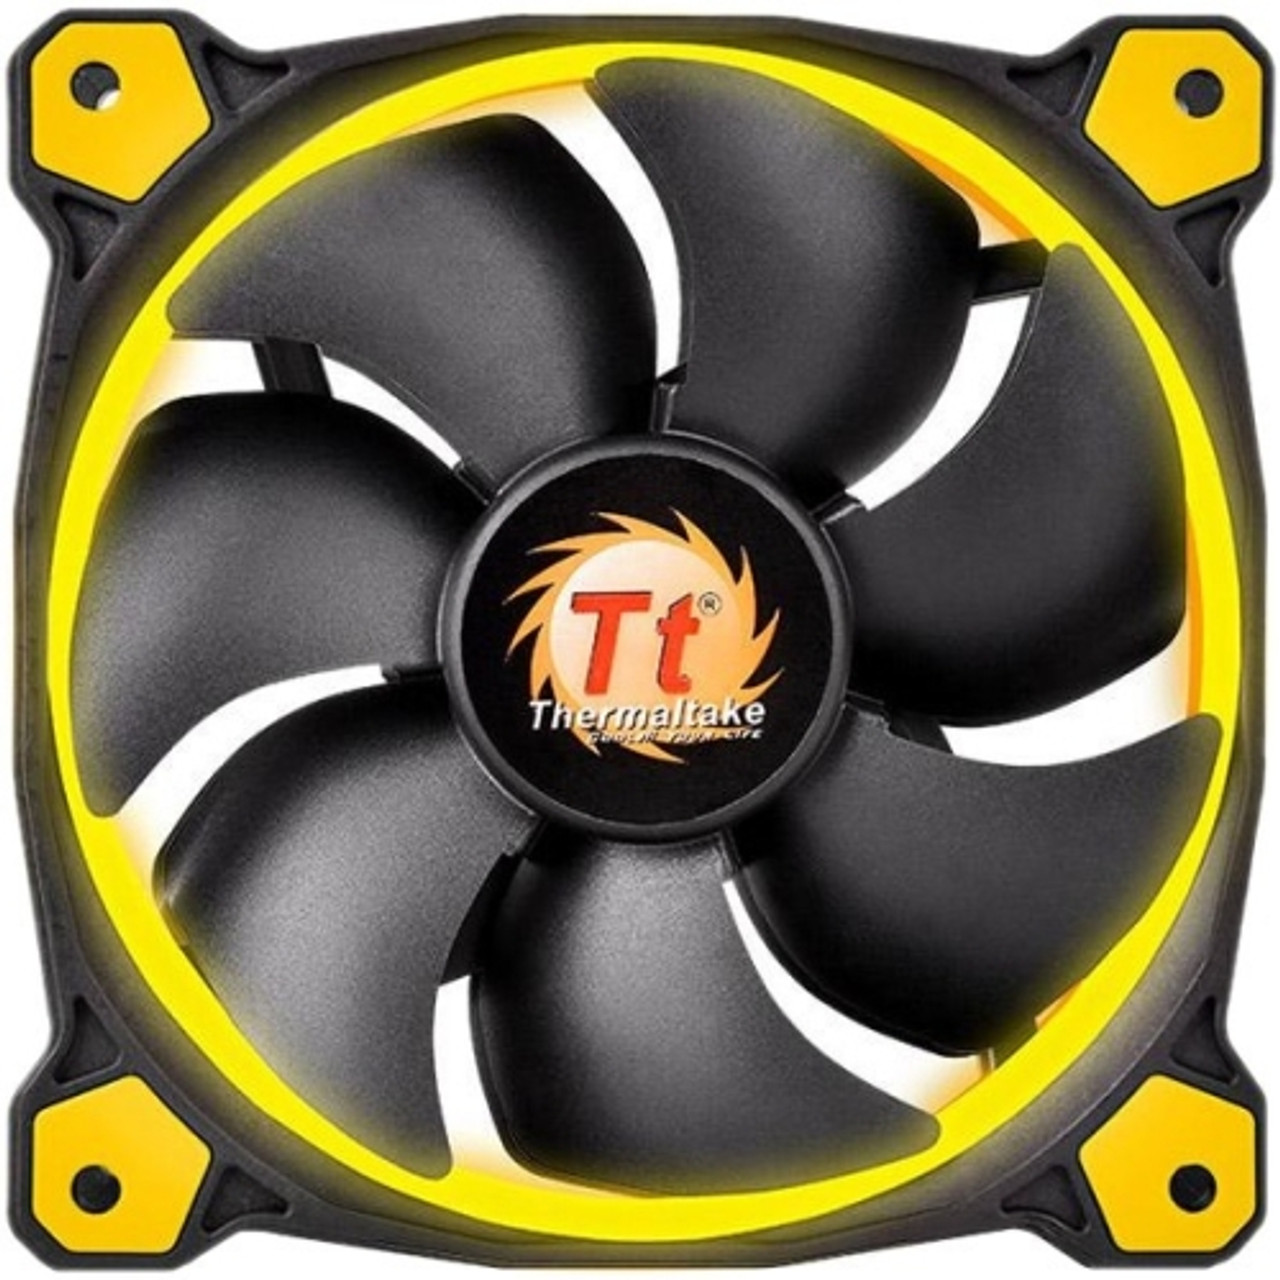 CL-F038-PL12YL-A Thermaltake Riing 12 High Static Pressure LED Radiator Fan